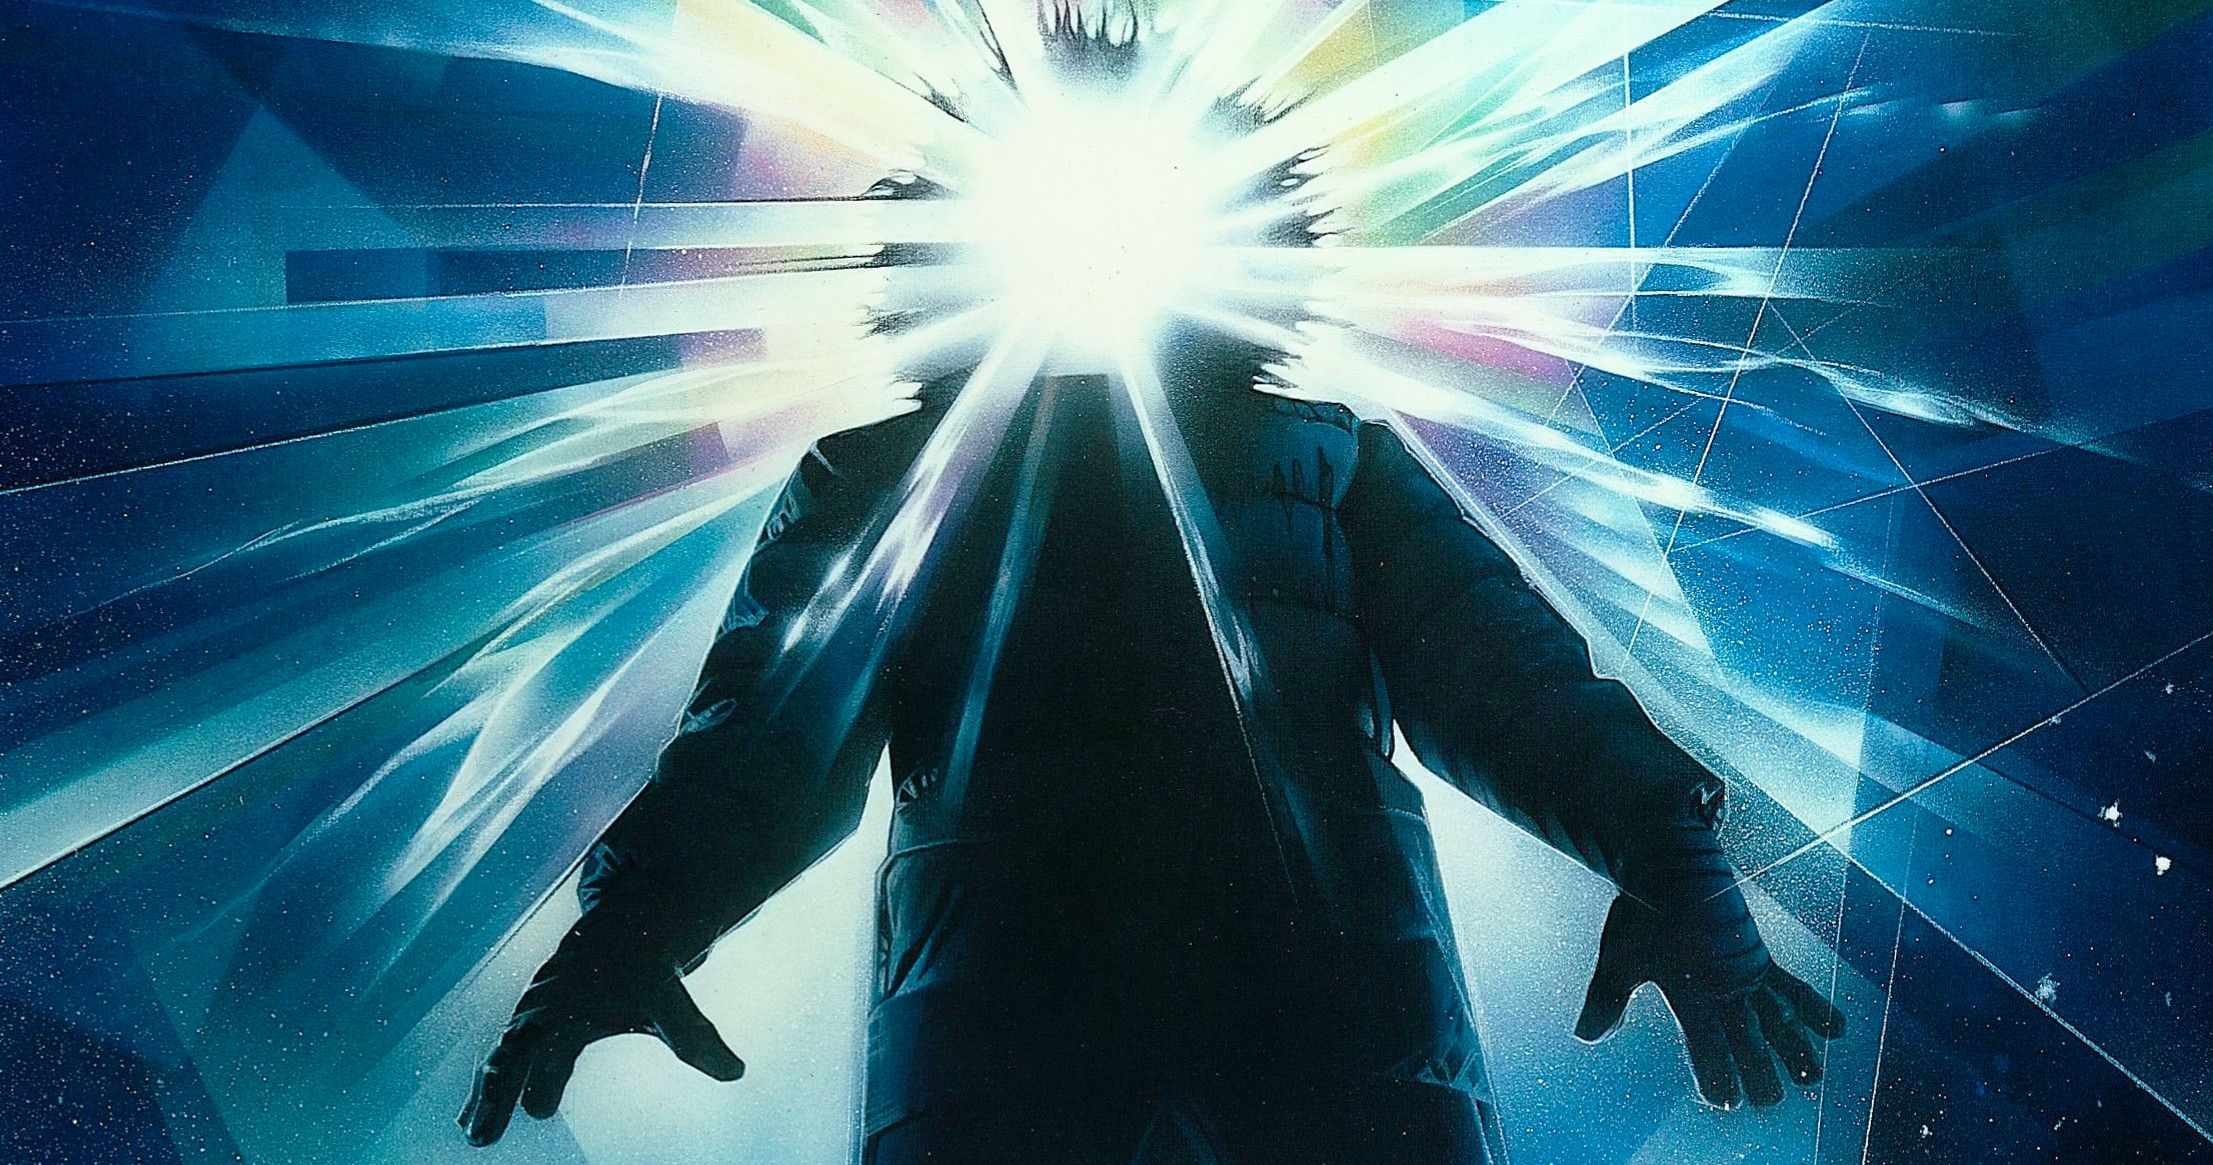 The Thing Poster by Drew Struzan Is Getting a Limited Edition Release You Have to See